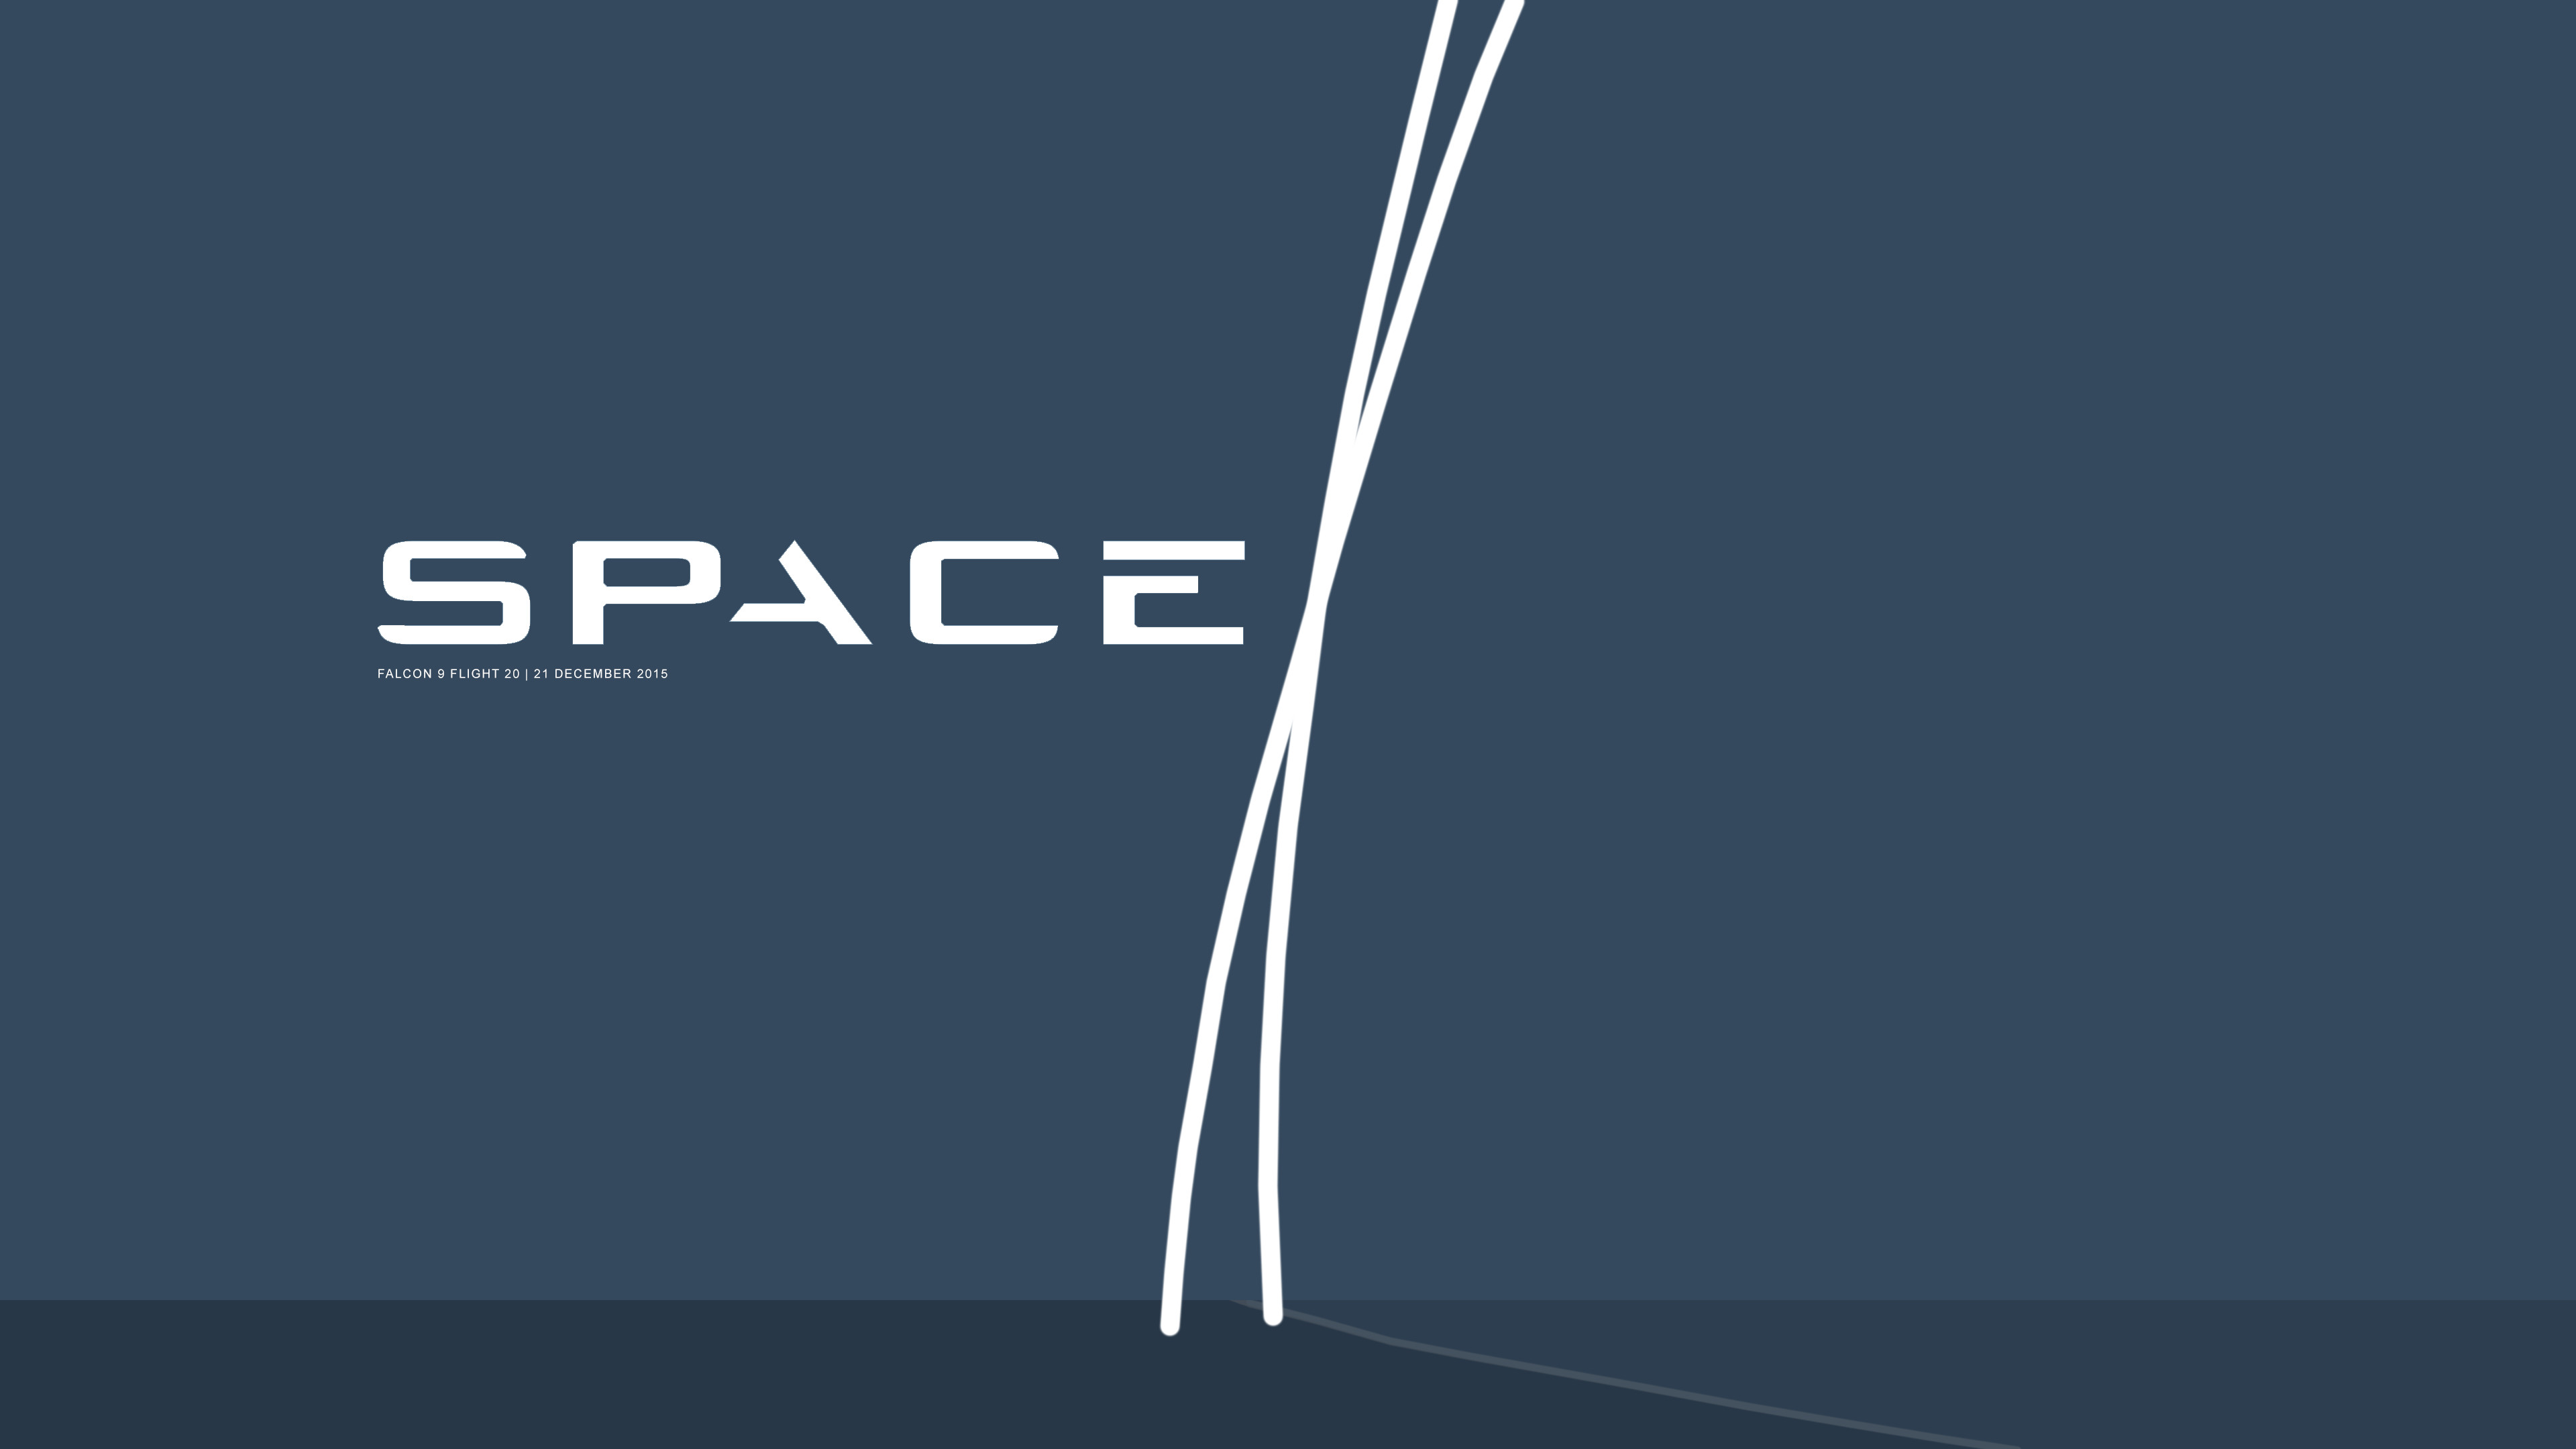 3840x2160 SpaceX wallpaper collection [2880x1800] | Free Beautiful Wallpaper |  Pinterest